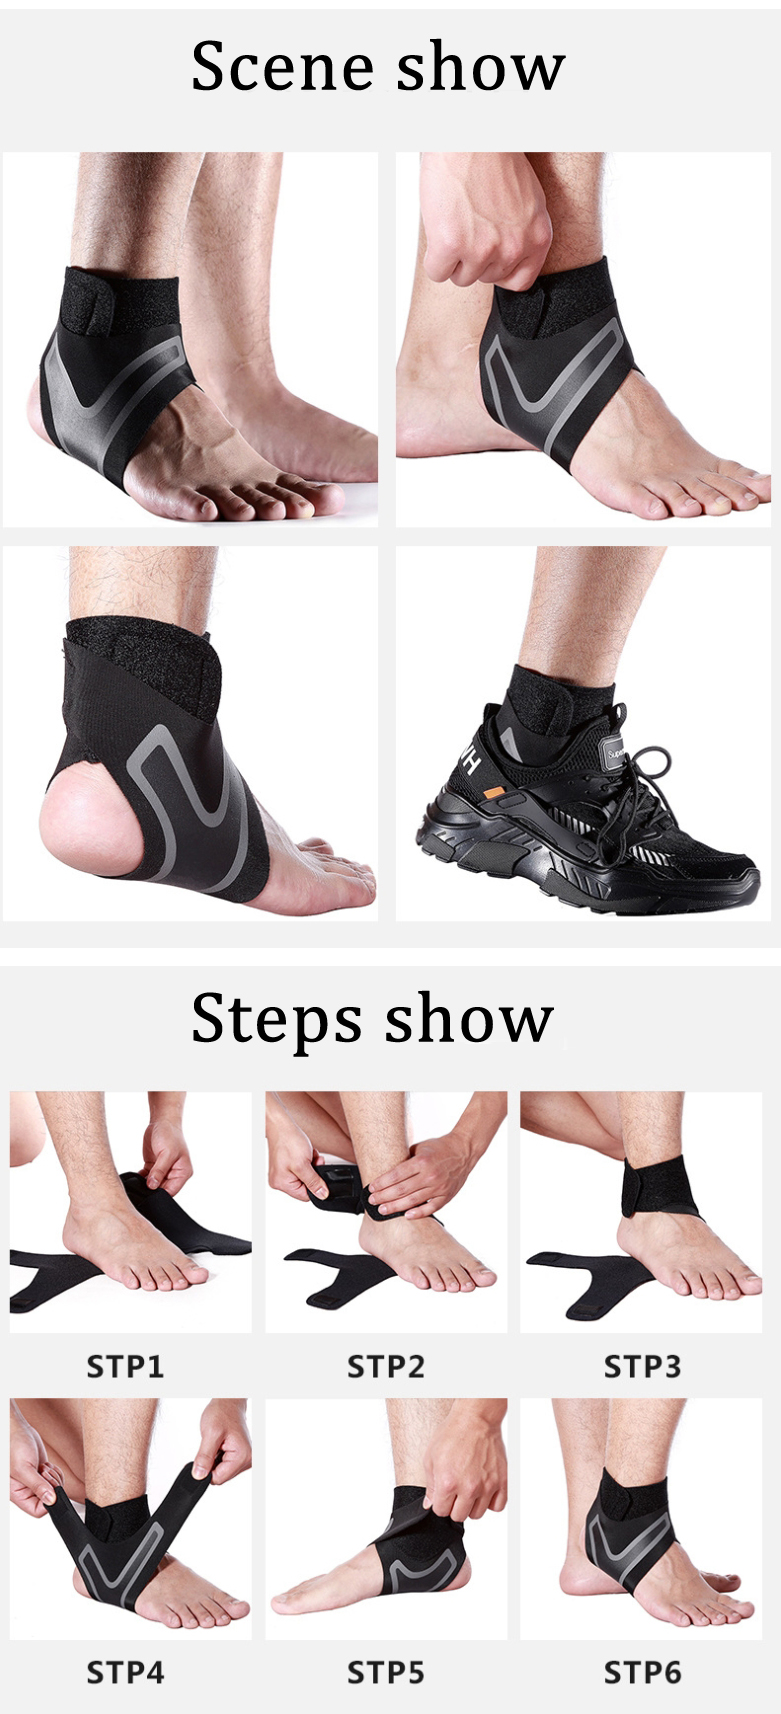 Mumian-Polyester-Fiber-Basketball-Football-Ankle-Support-Breathable-Thin-Outdoor-Sports-Ankle-Brace--1474013-4